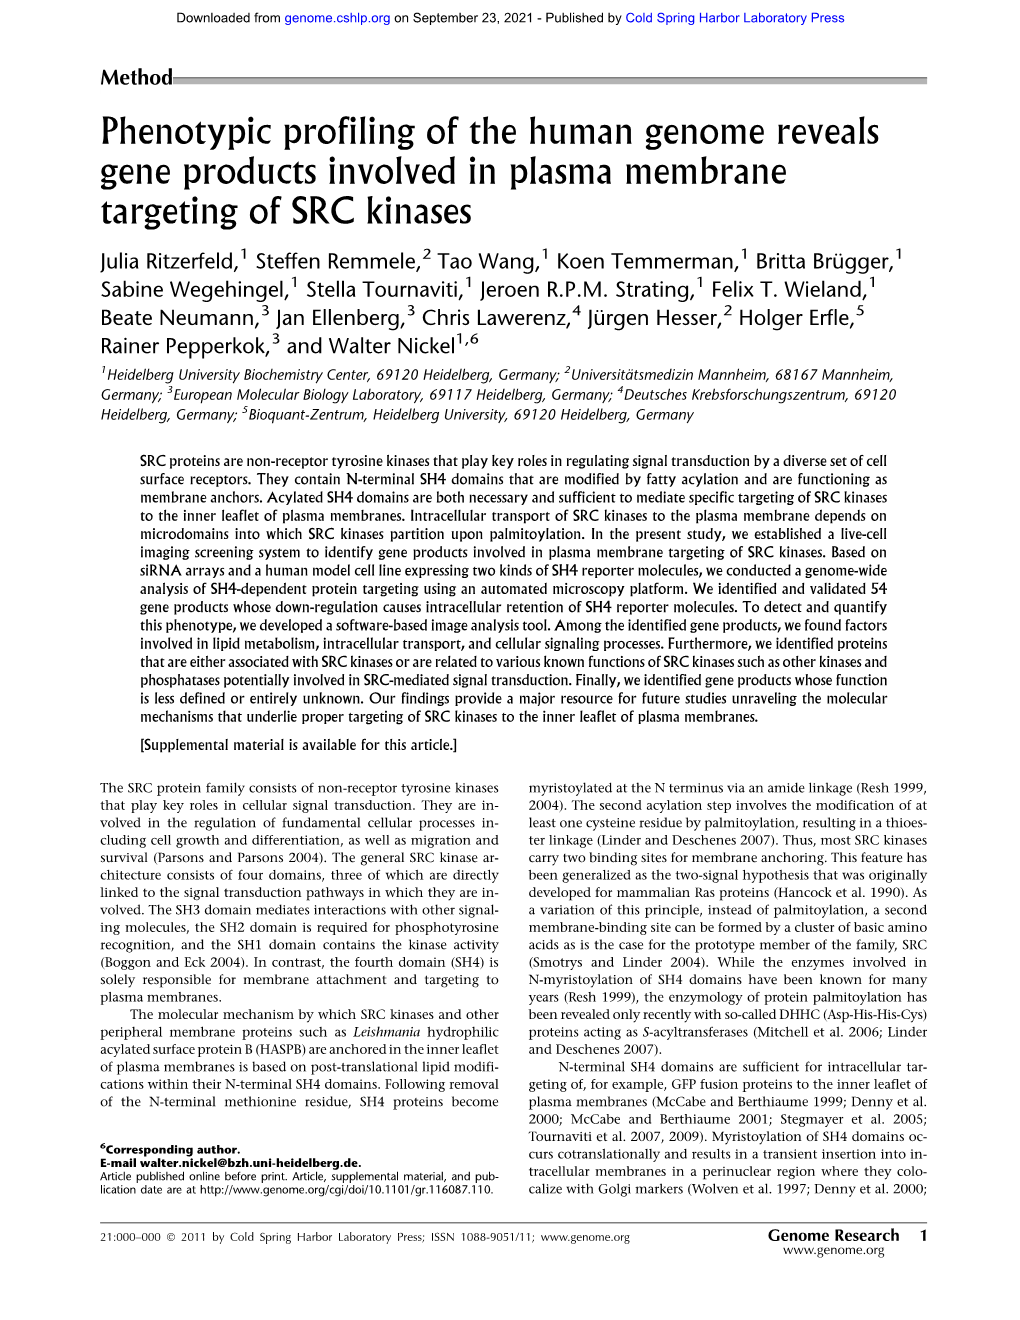 Phenotypic Profiling of the Human Genome Reveals Gene Products Involved in Plasma Membrane Targeting of SRC Kinases